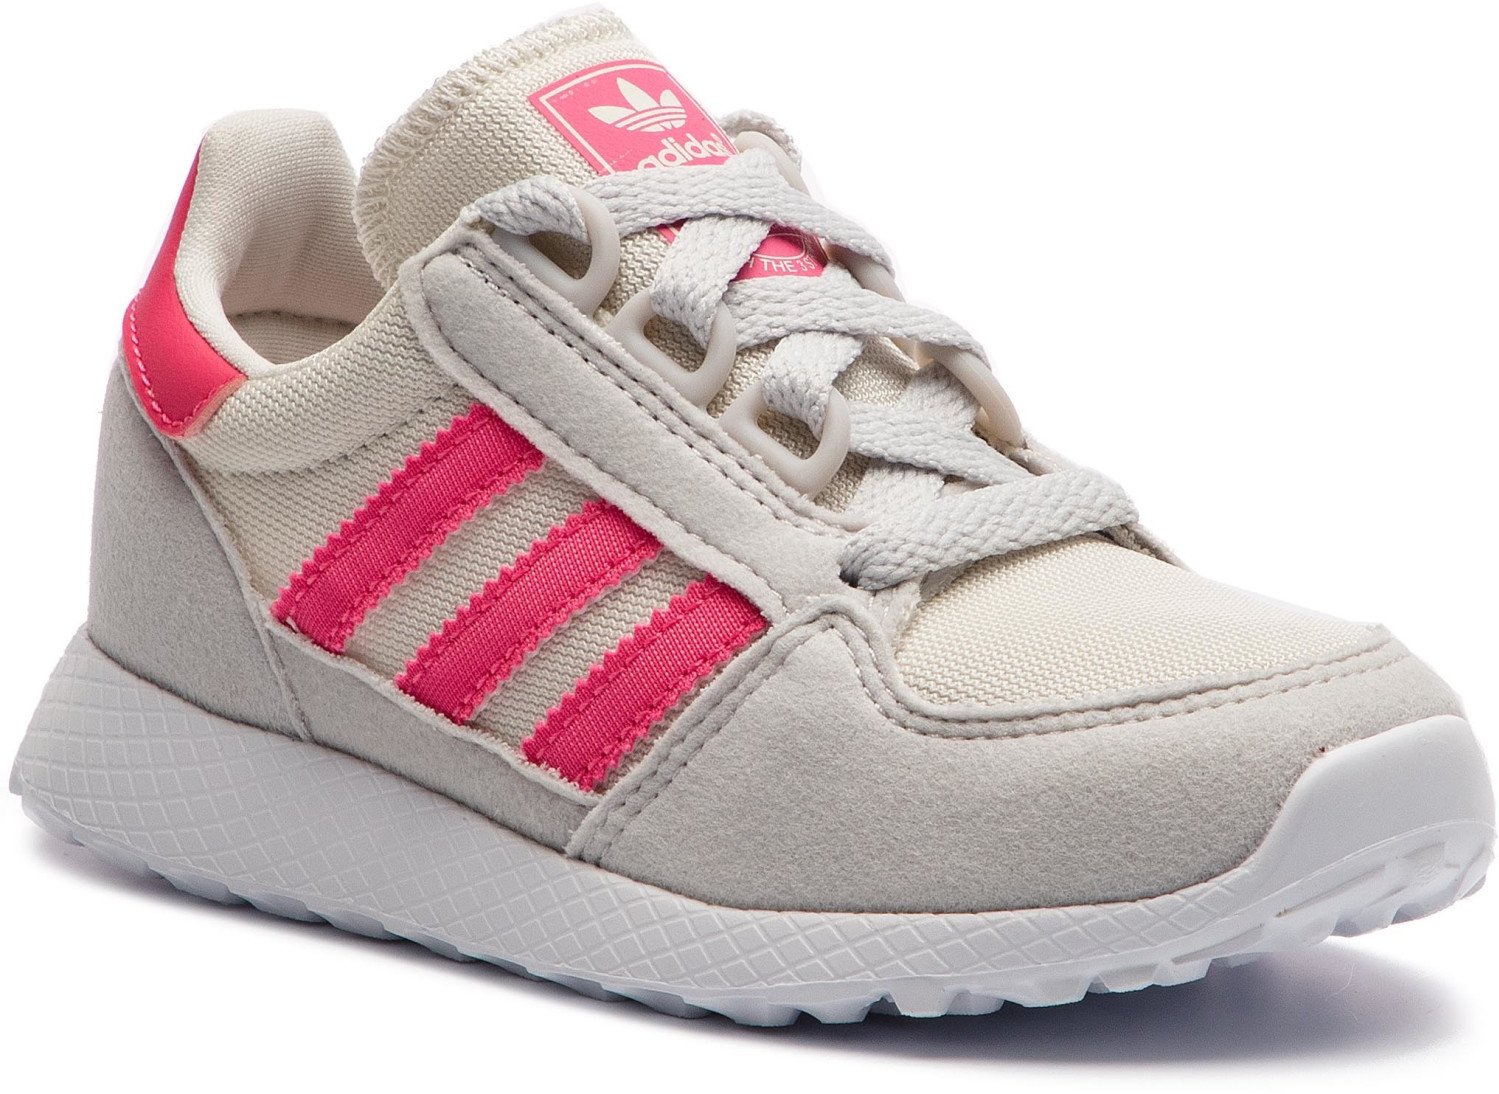 Adidas Forest Grove K chalk white/real pink/grey one